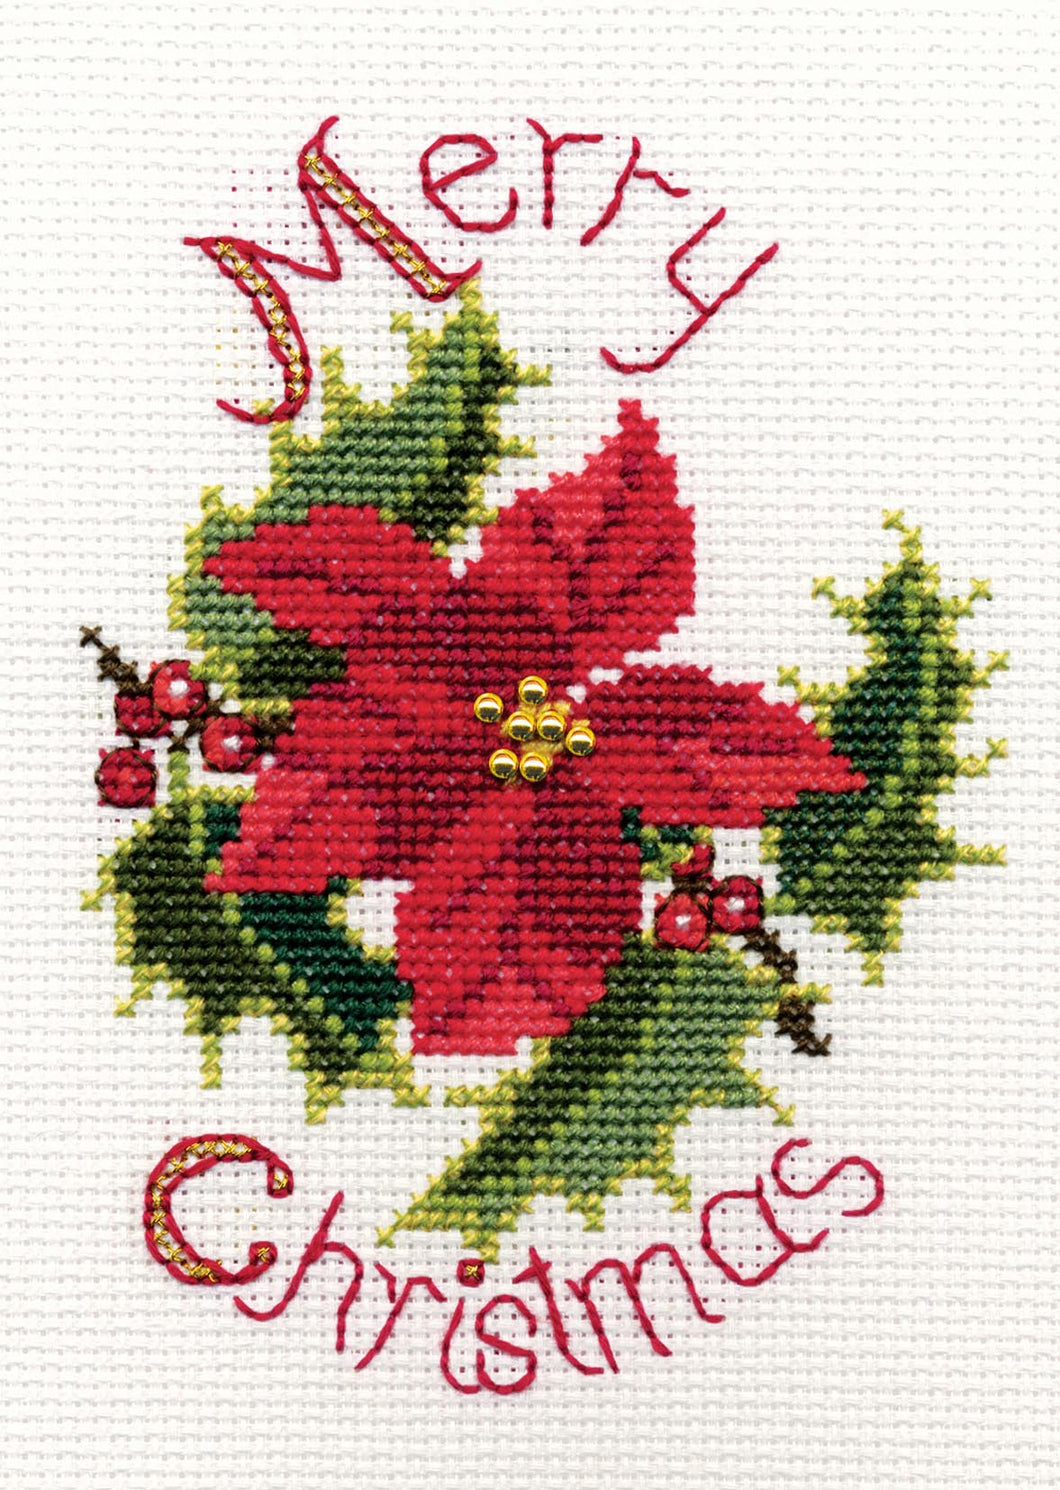 Poinsettia and Holly - Christmas Card Cross Stitch Kit